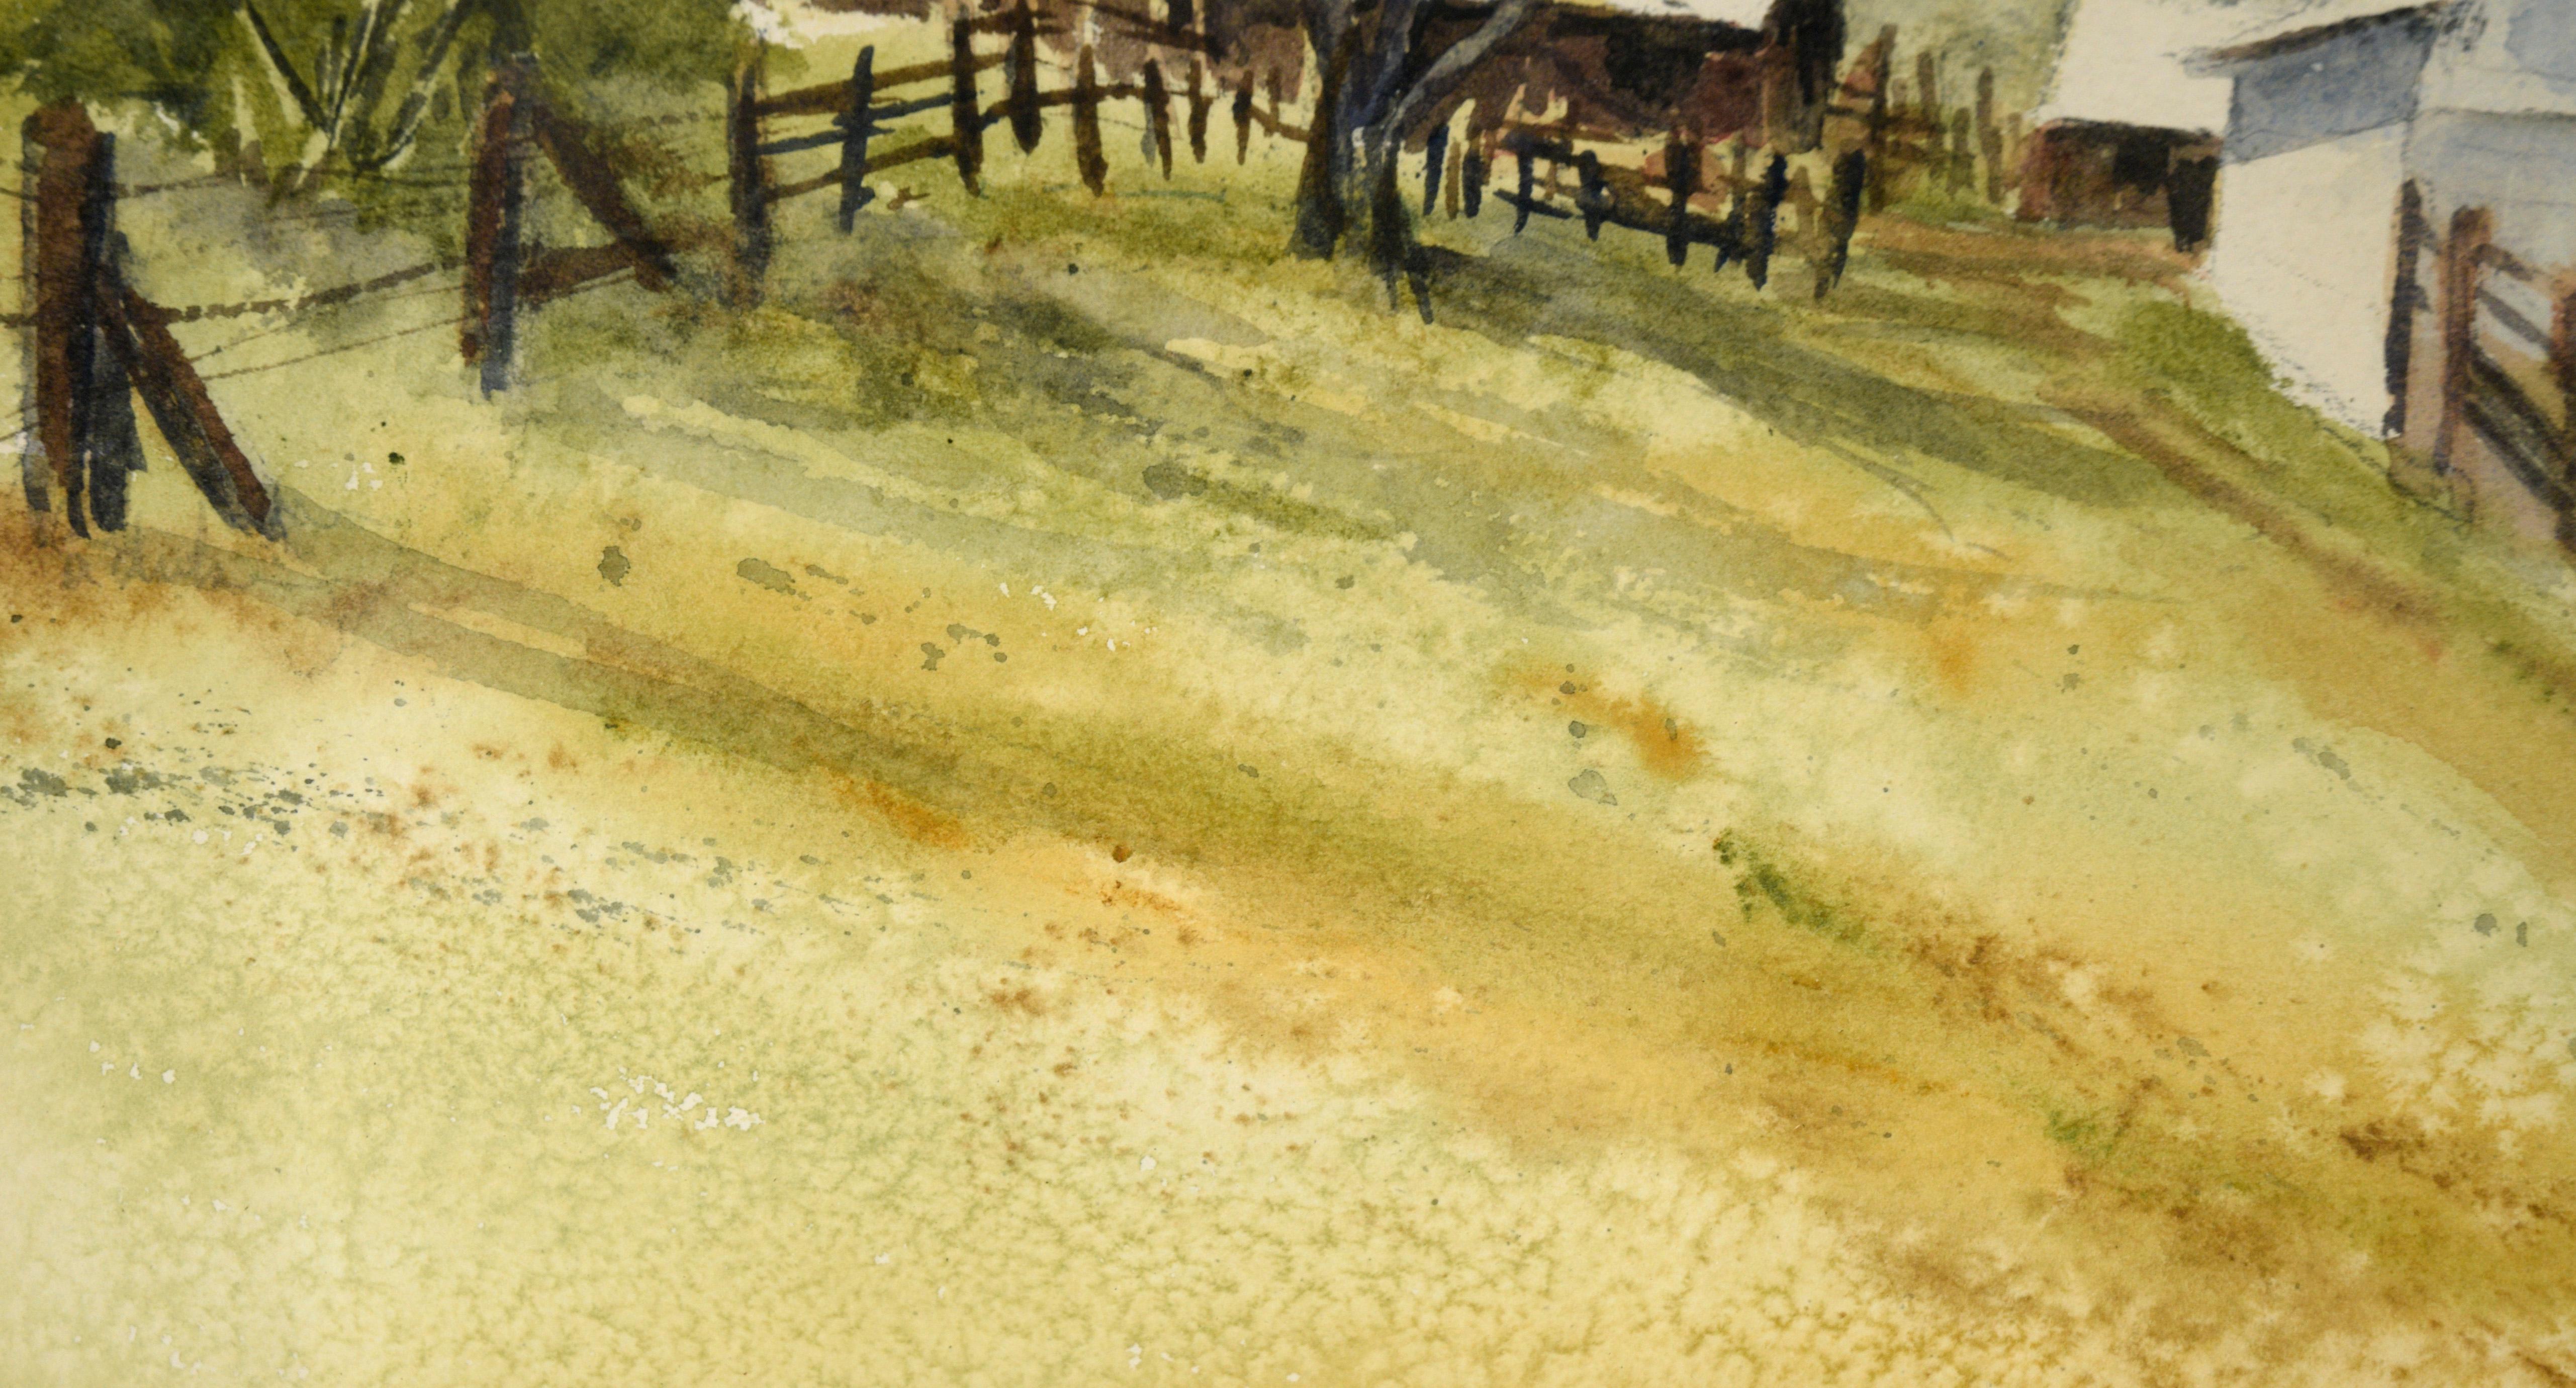 Grey Barn and Brown House - Rural California Landscape in Watercolor on Paper For Sale 2